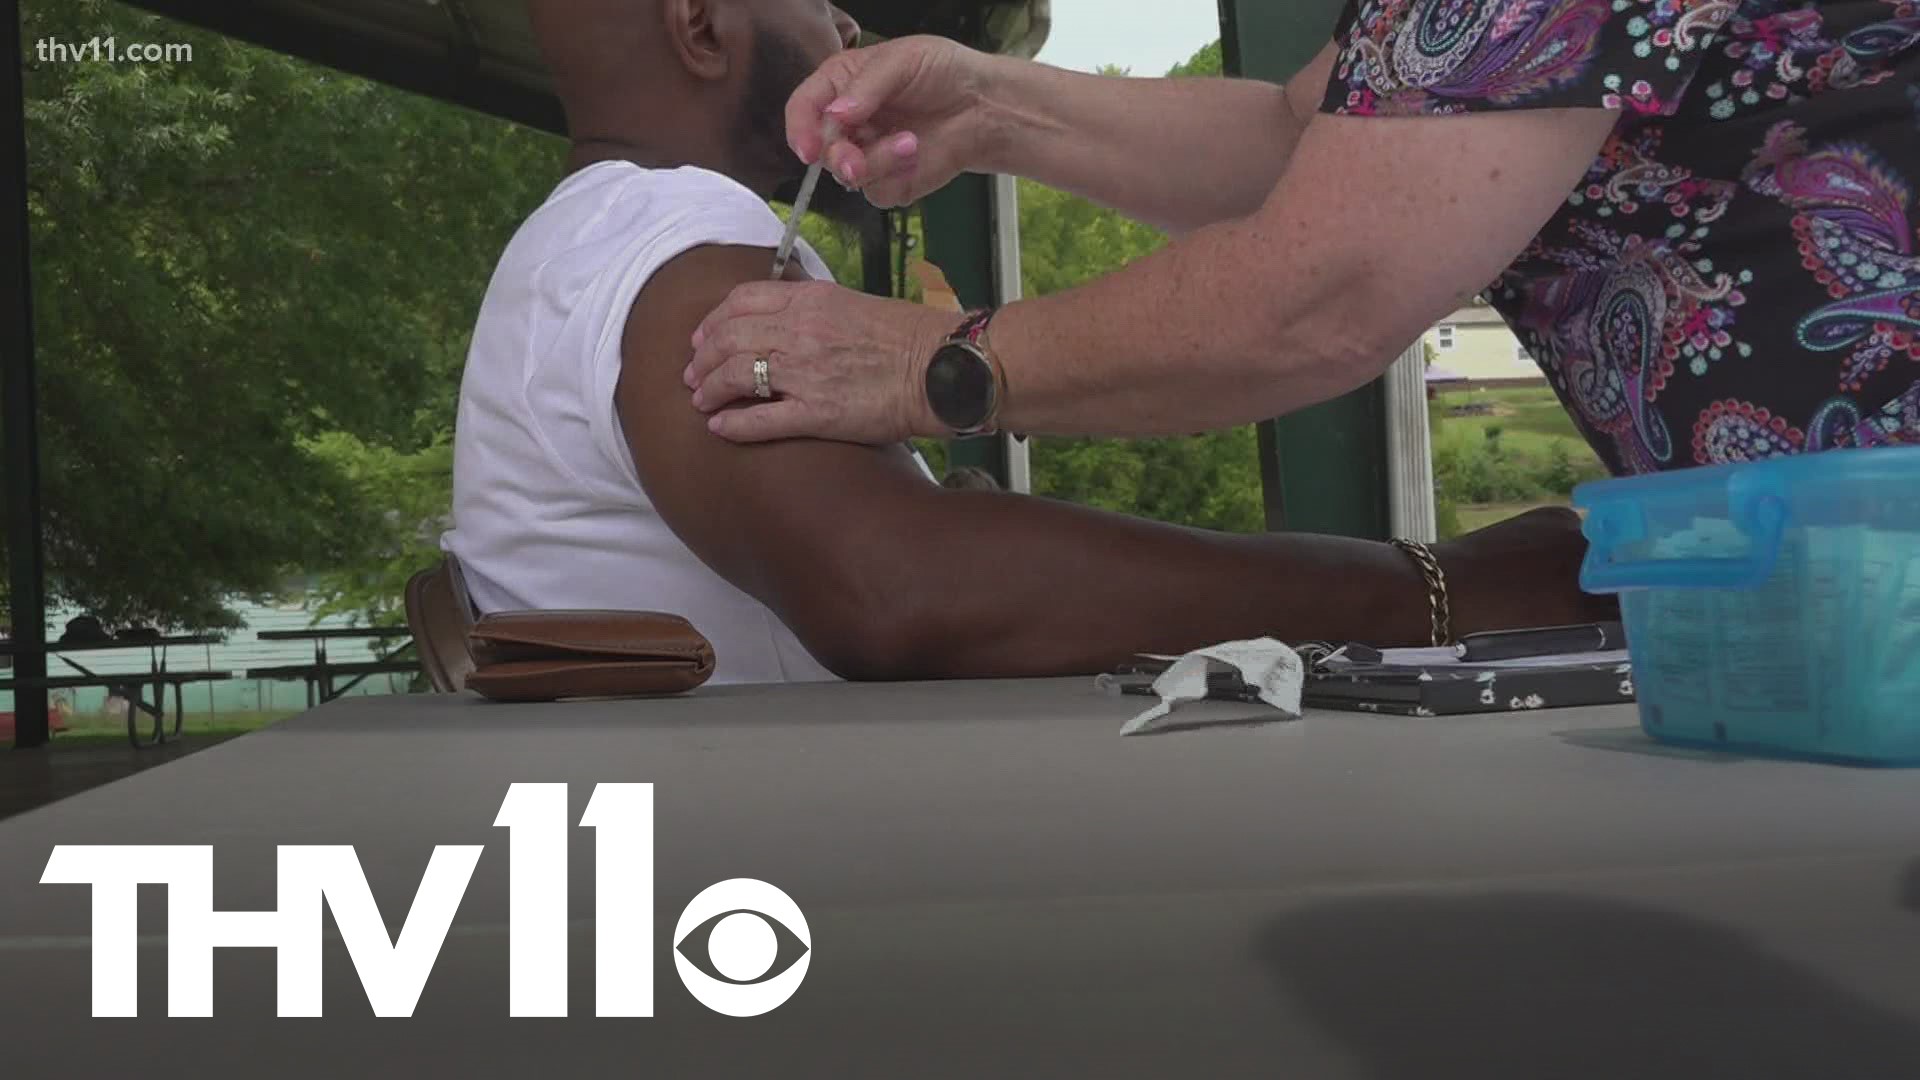 Over the last several months, the rate of vaccinations in Arkansas hasn't been high. Many of the people who wanted to get their shot have already gotten it.